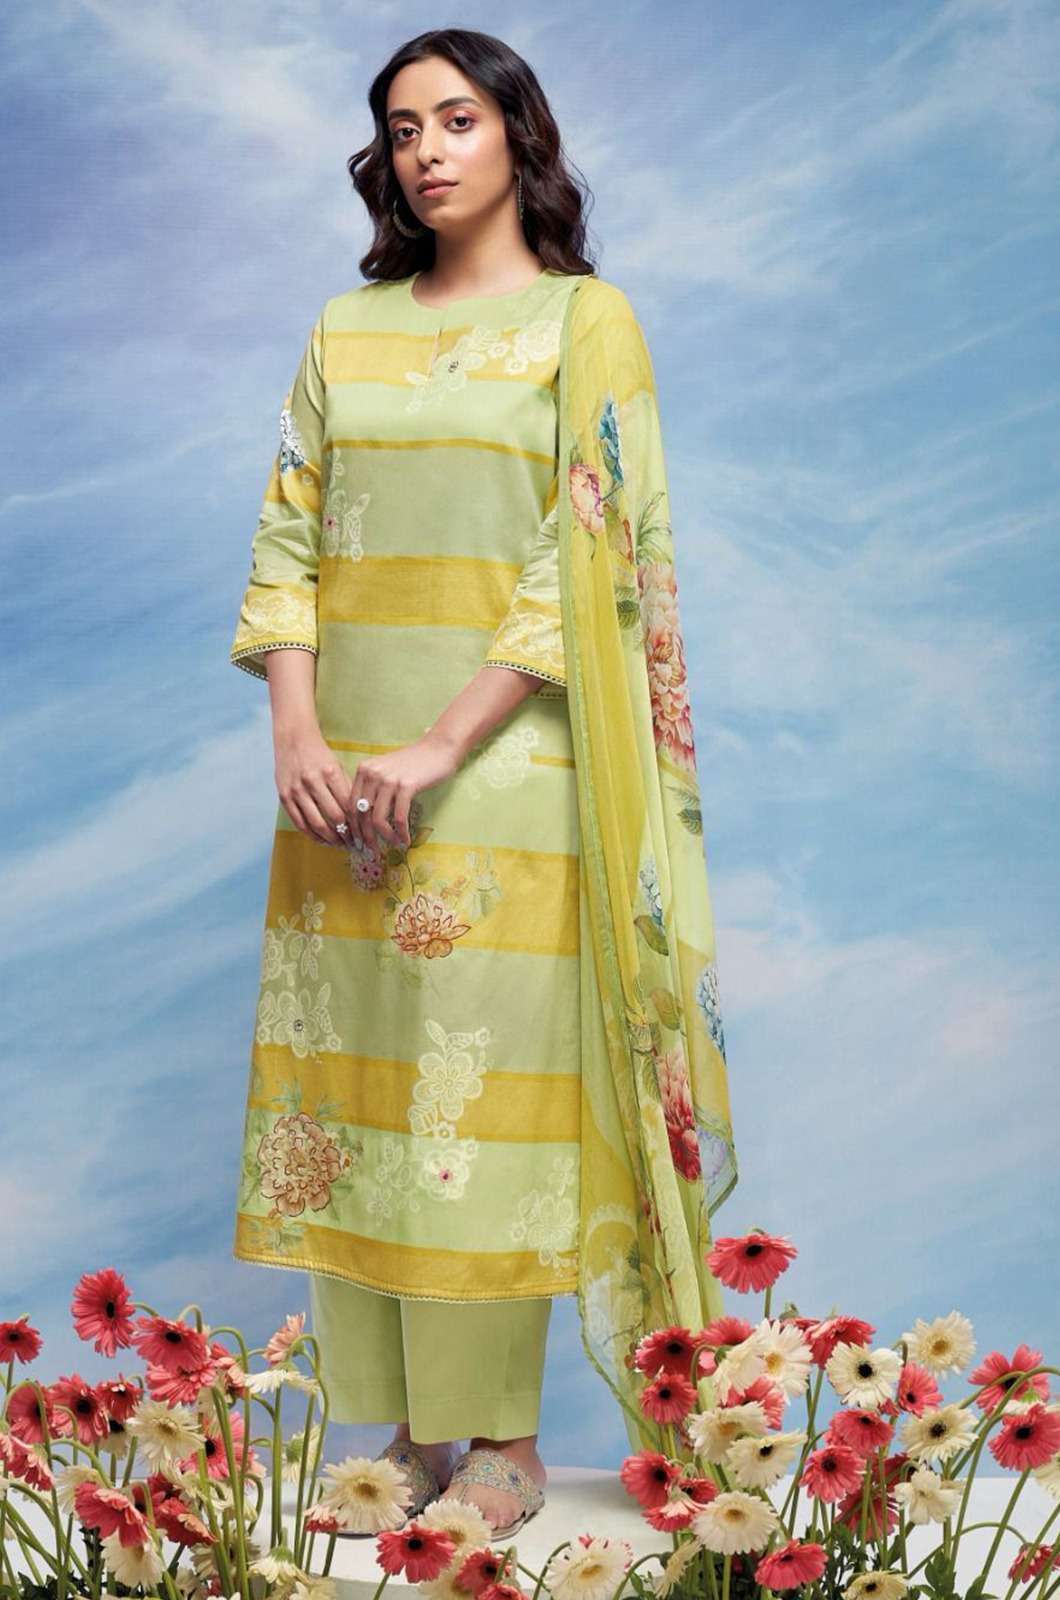 Ganga Teagana 2355 PREMIUM COTTON SILK DIGITAL PRINTED WITH AARI WORK & HAND EMBROIDERY COTTON LACE AND EXTRA SLEEVE SUIT